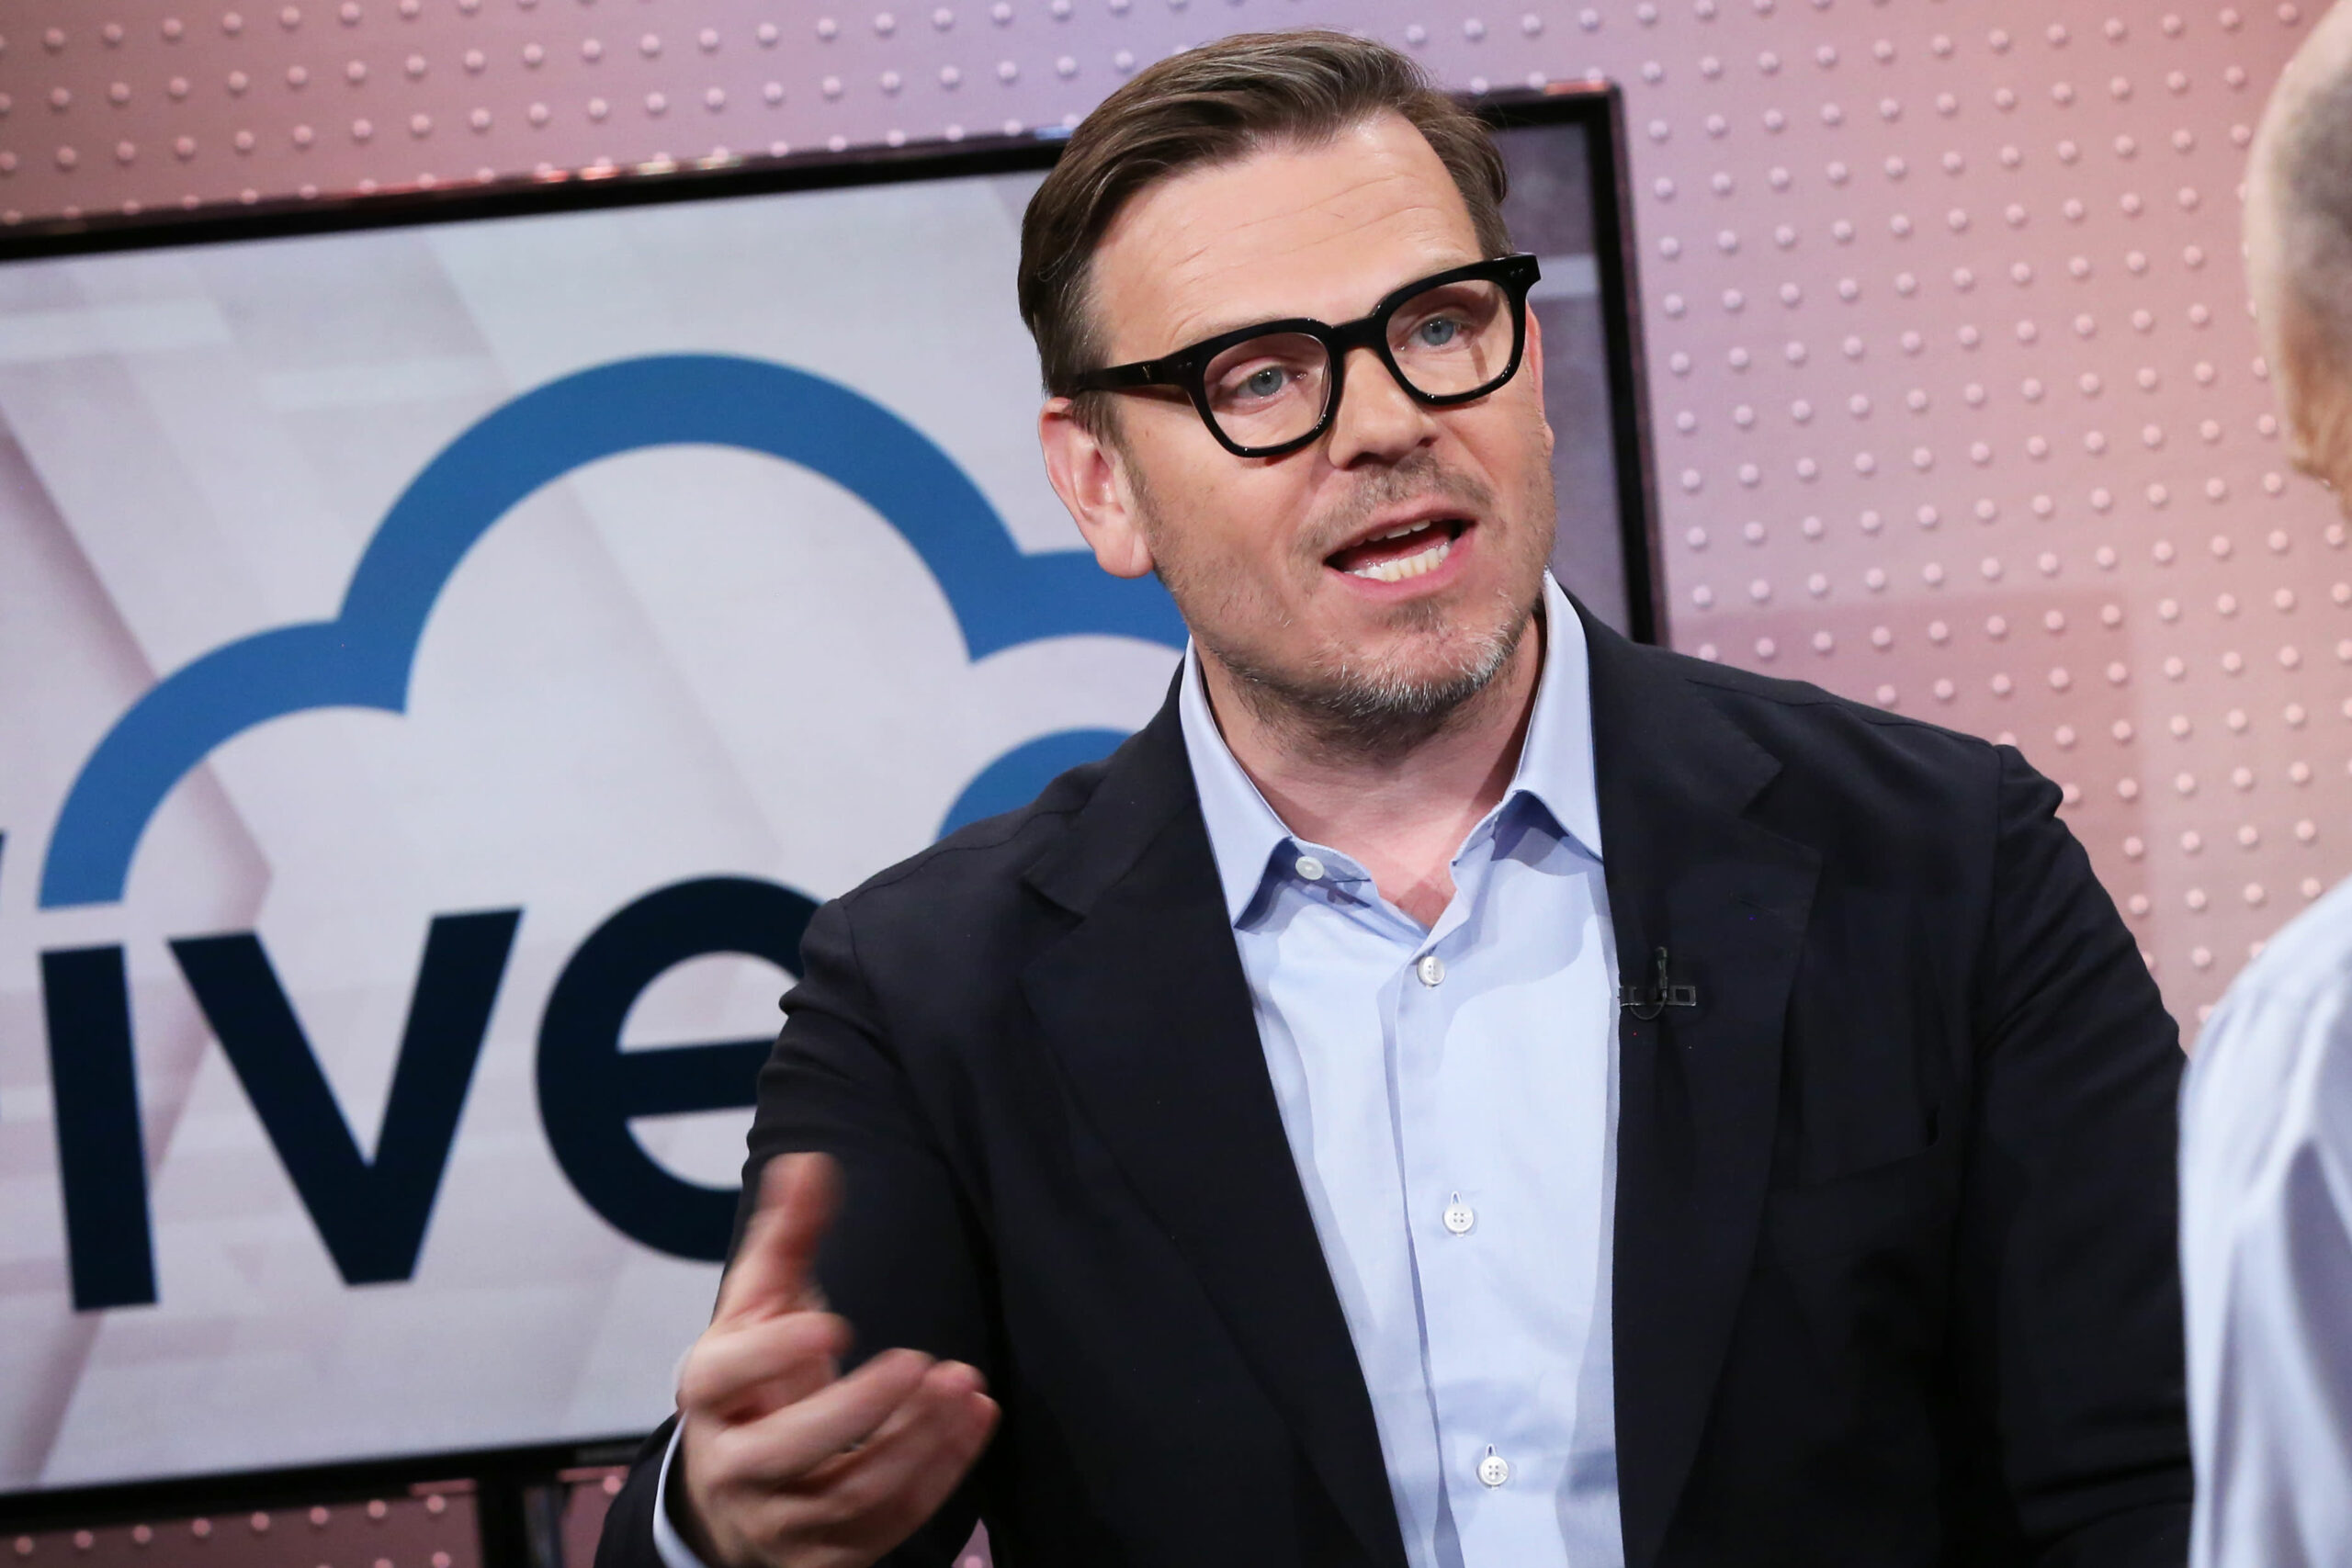 Five9 CEO says development is accelerating as cloud adoption sees new part